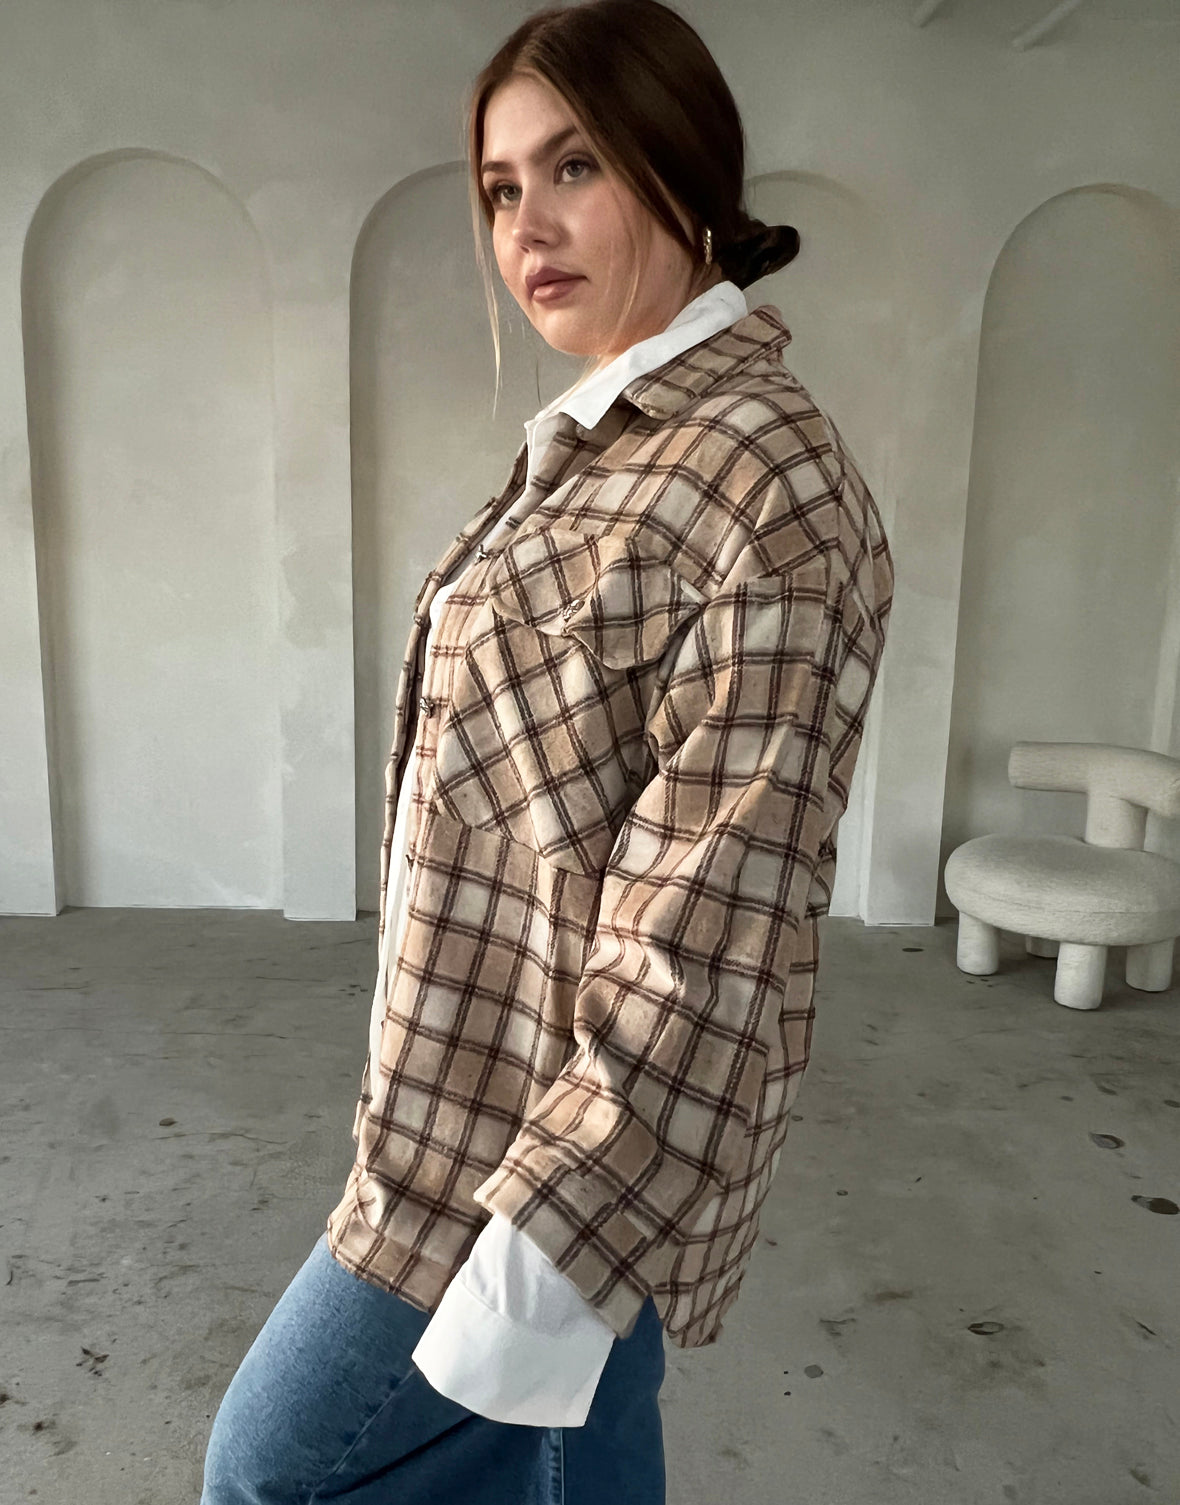 Plus Size Plaid Shacket with Pockets